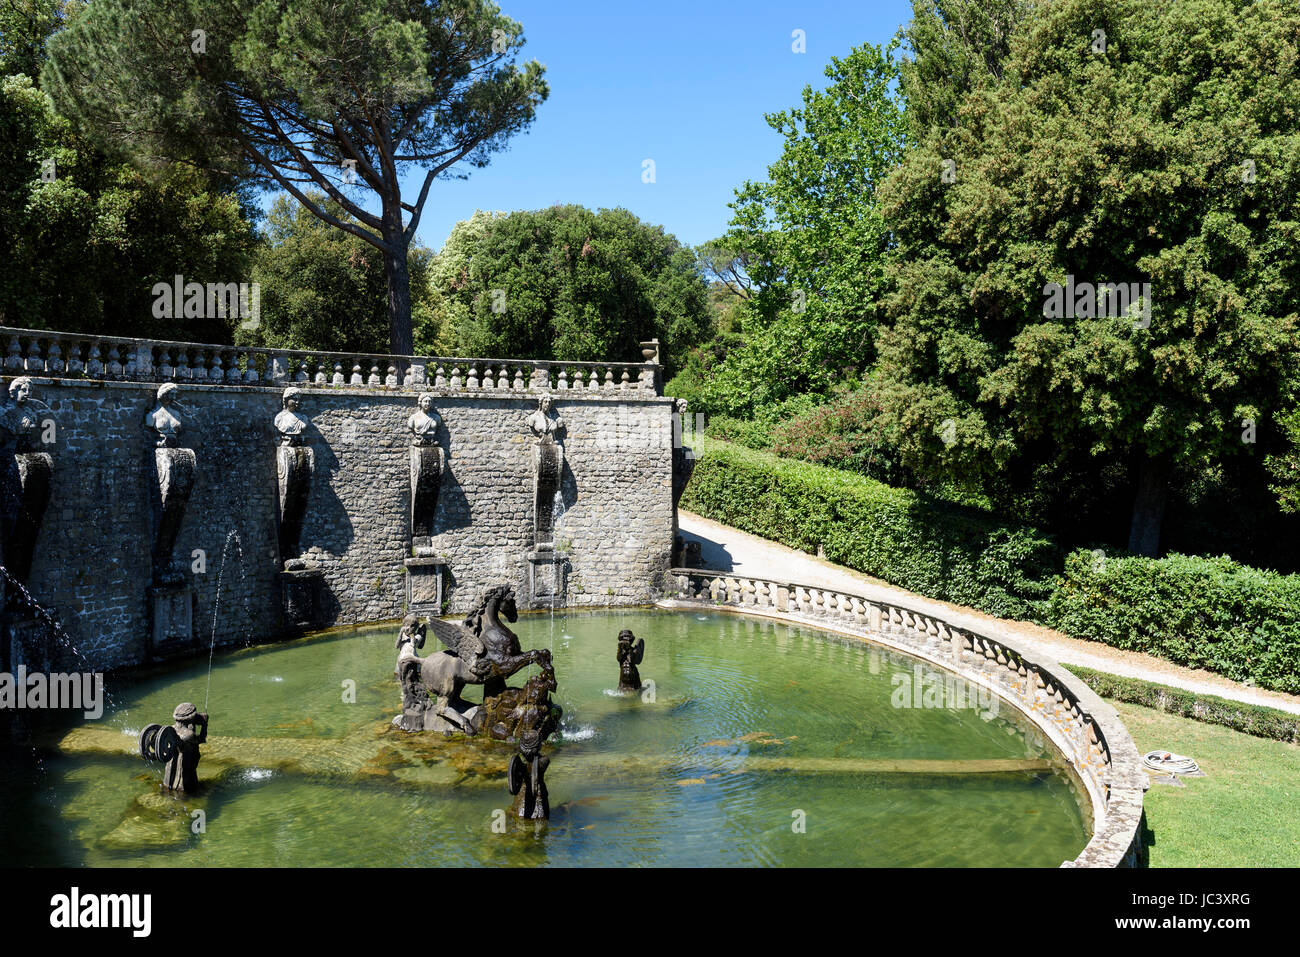 Bagnaia. Viterbo. Italy. Fountain of Pegasus in the 16th century Mannerist style Villa Lante and gardens. Stock Photo